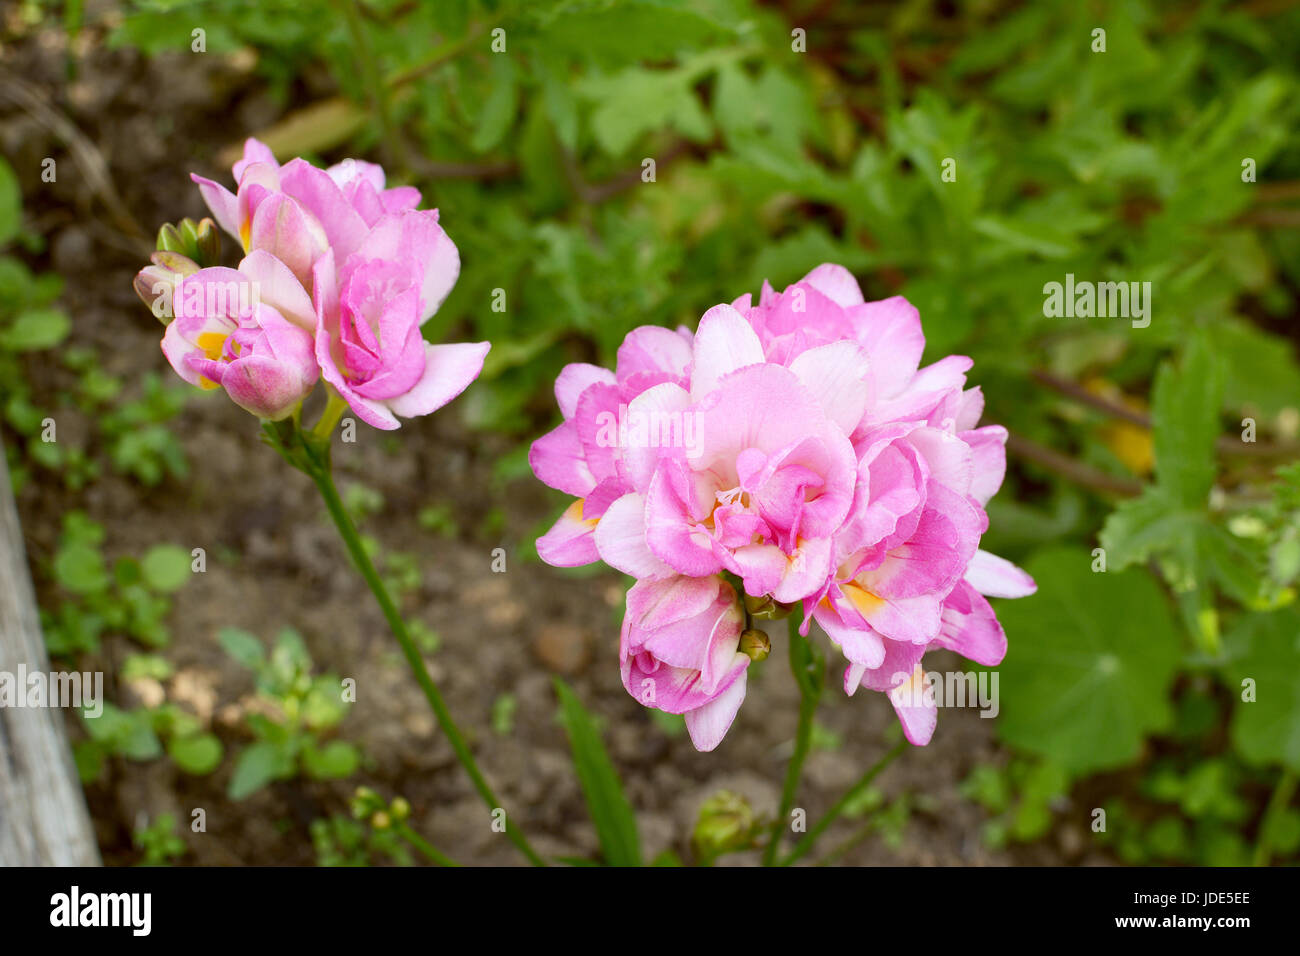 Two clusters of pink double freesia flowers against a background of green foliage Stock Photo